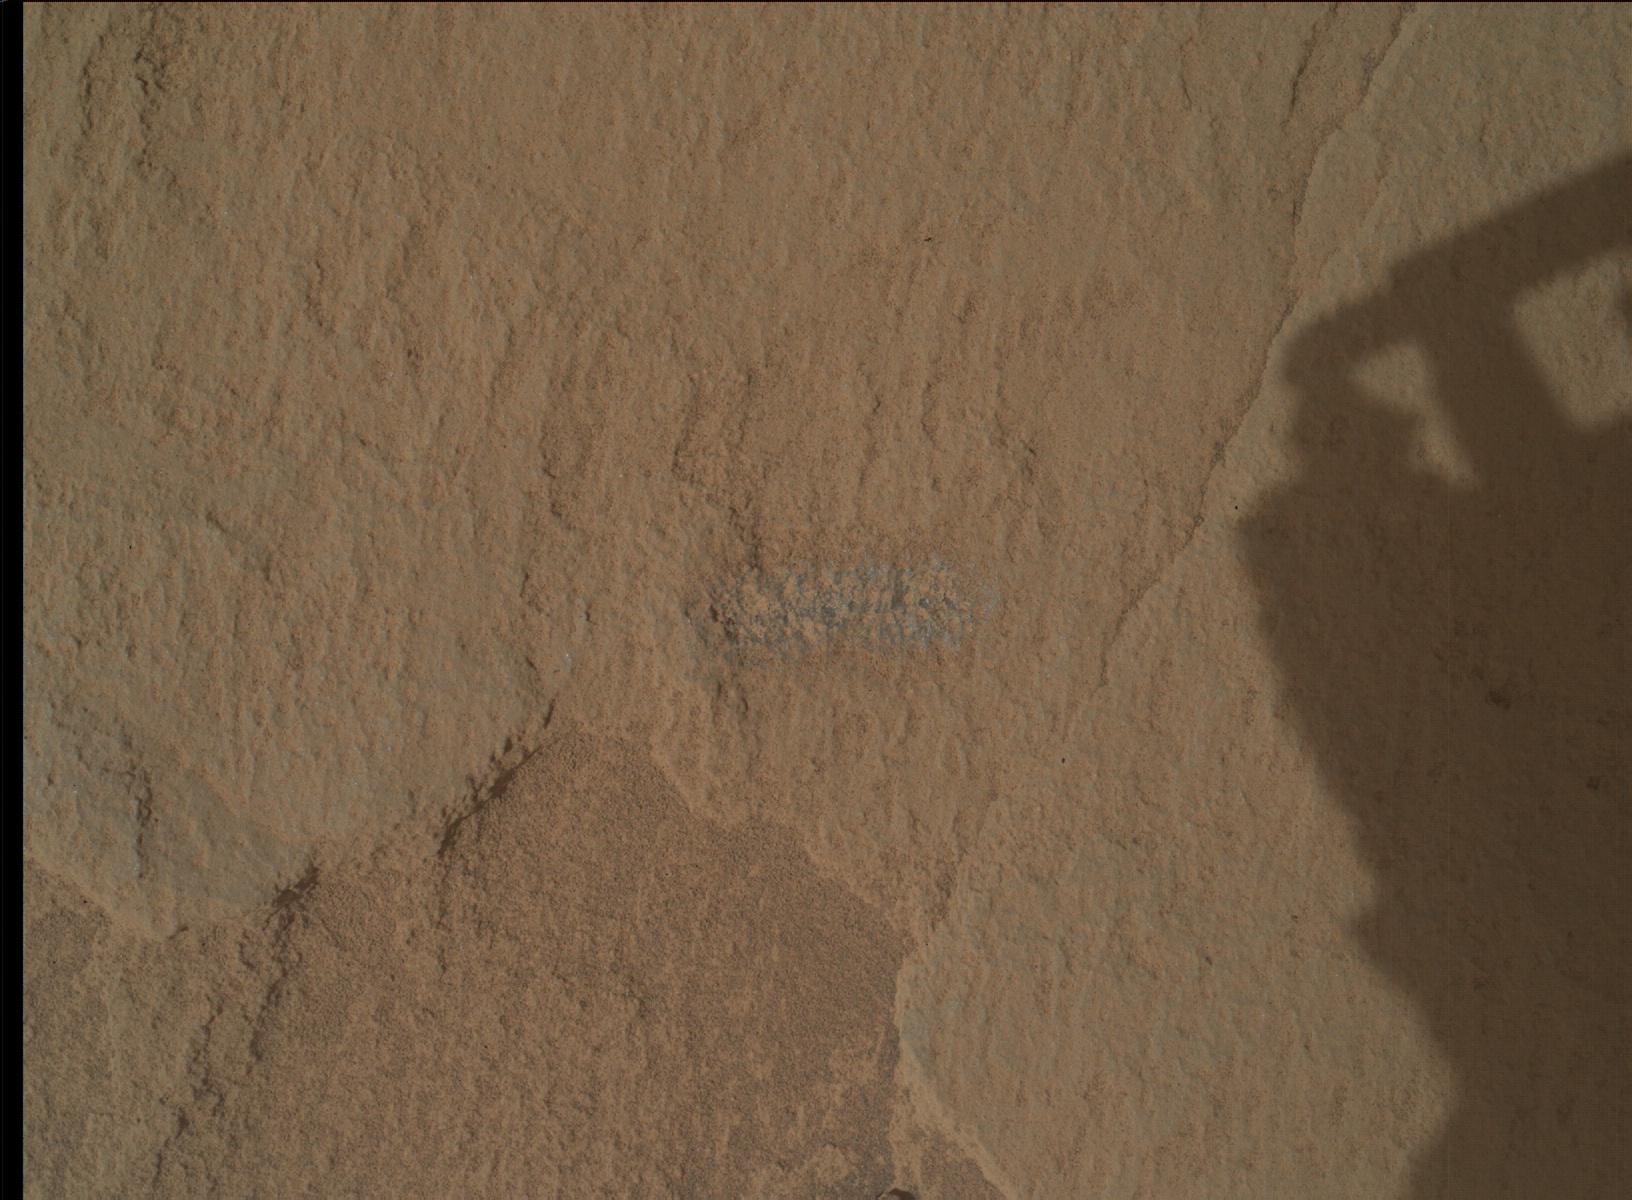 Nasa's Mars rover Curiosity acquired this image using its Mars Hand Lens Imager (MAHLI) on Sol 2703